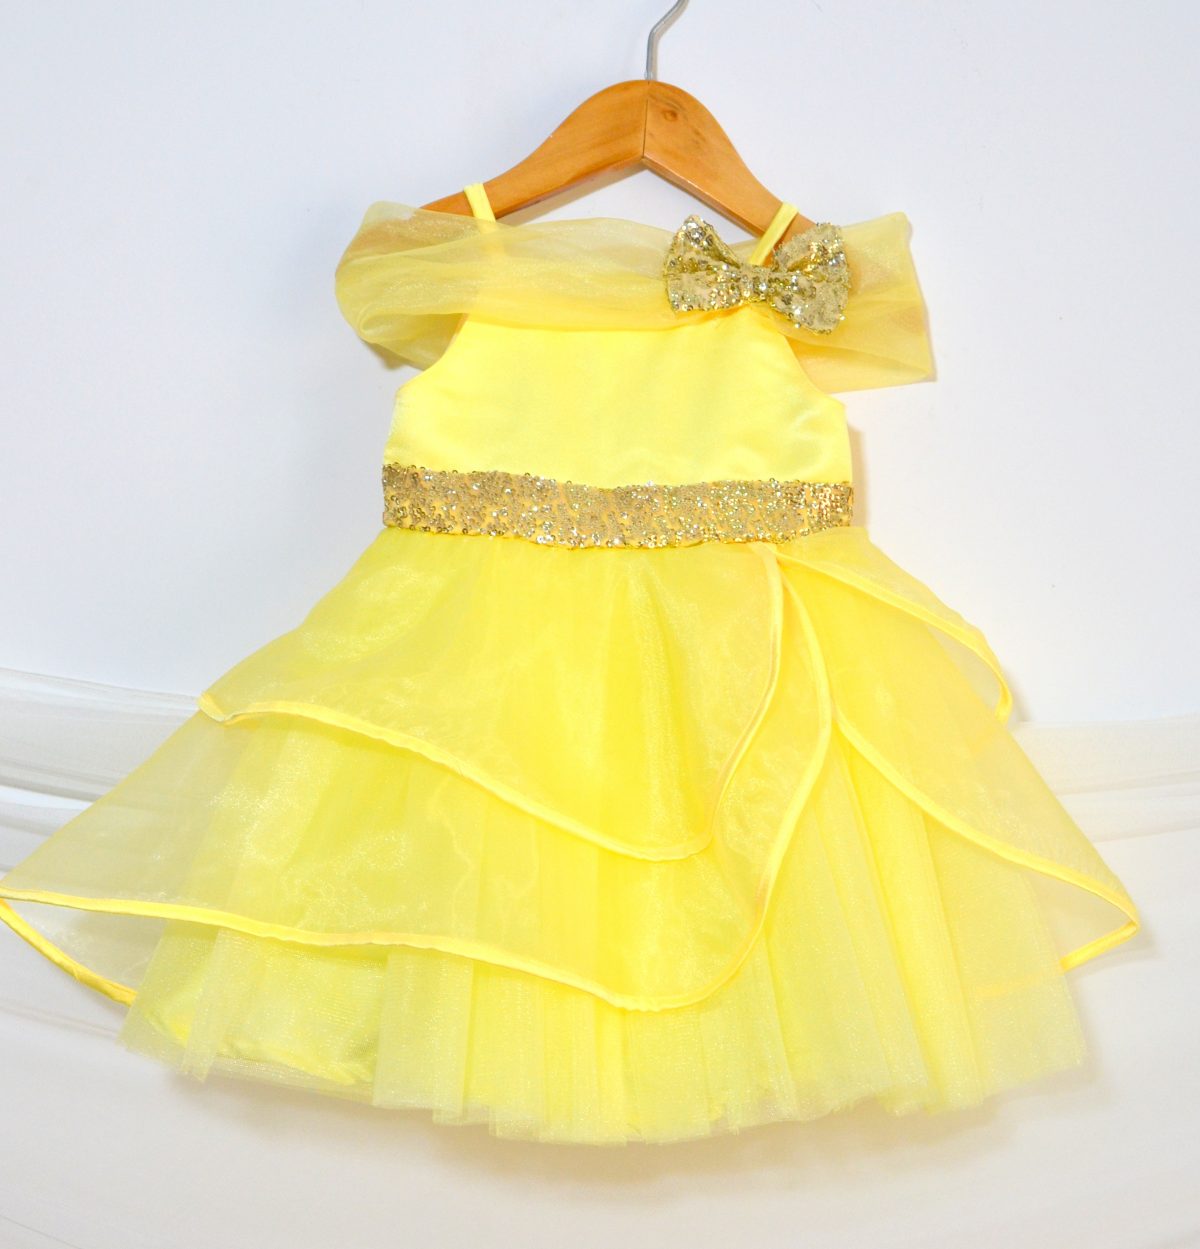 DSC 0070 scaled TBT Off-Shoulder organza layered gown- Yellow